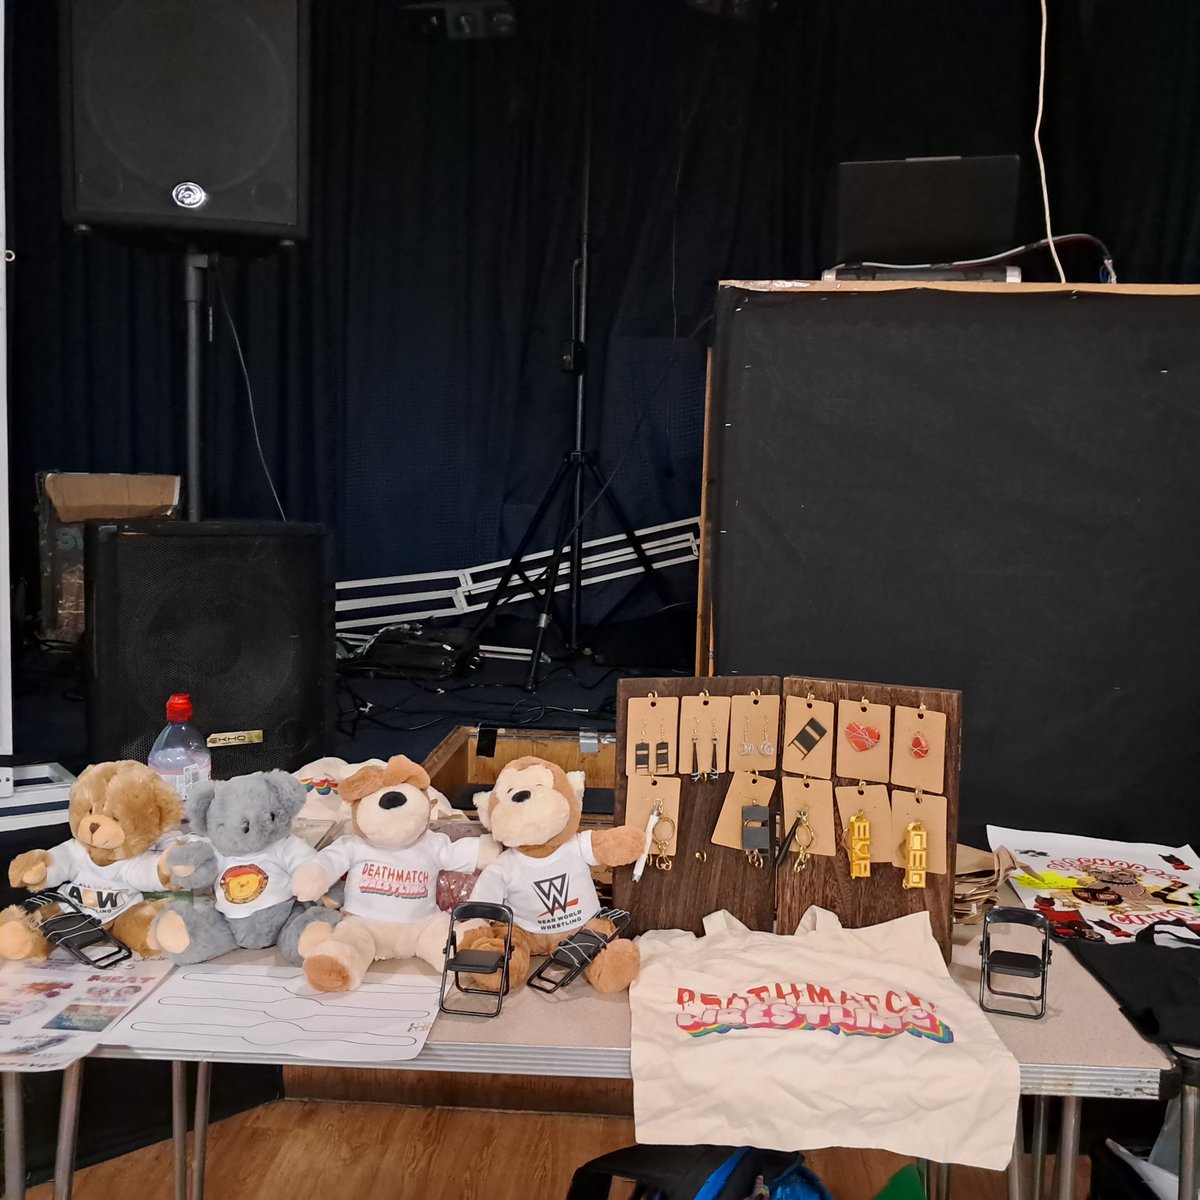 All set up ready for @Infinite_Promo come and say hello to the wrestle teds